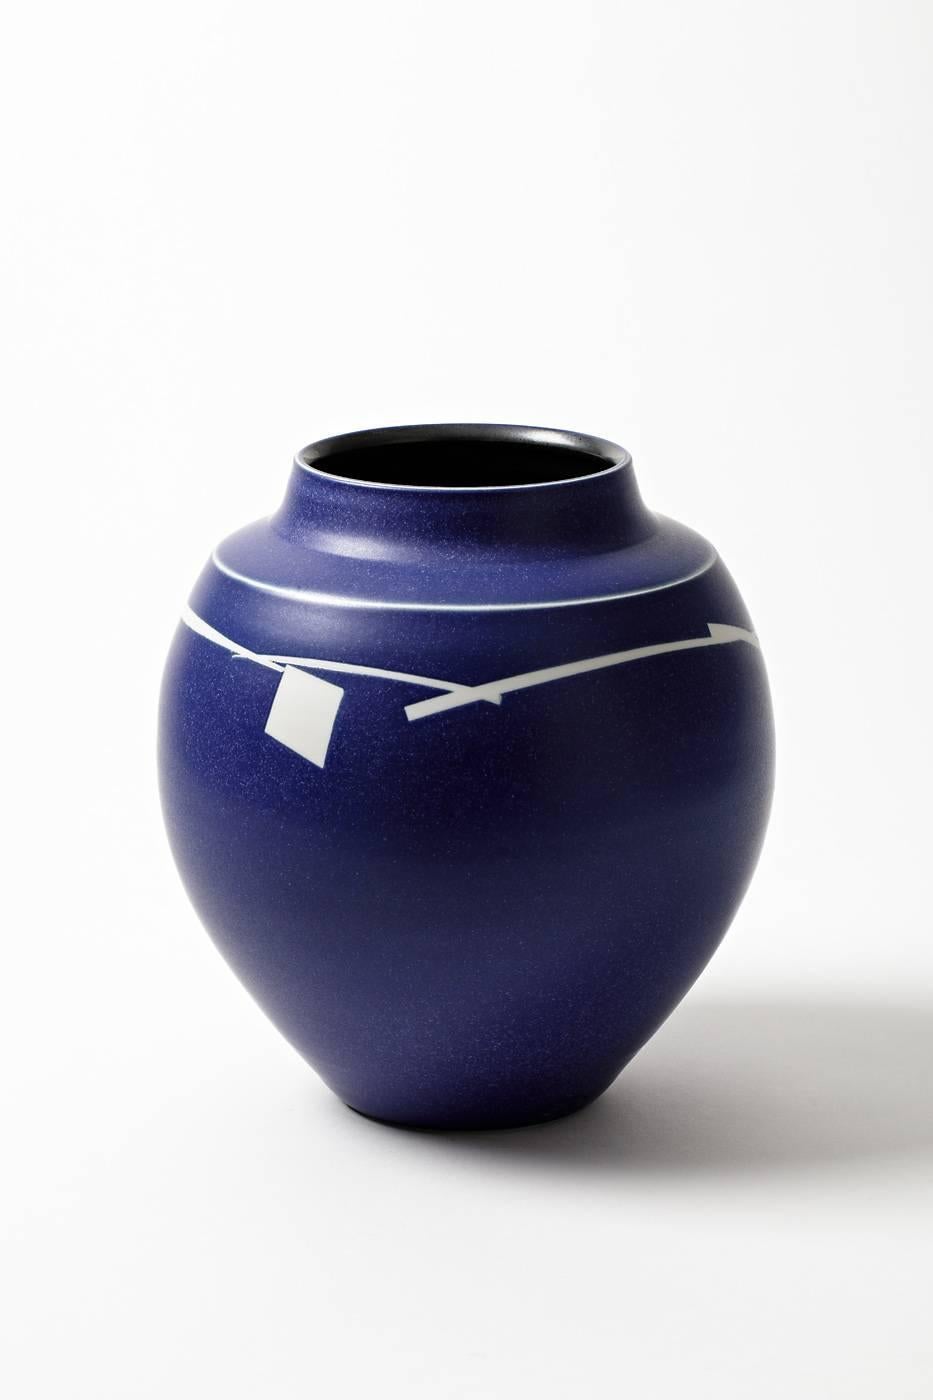 A porcelain vase by Robert Deblander with blue glaze and white geometrical decoration.
Handwritten signature under the base and artist monogram, circa 1990.
Unique piece.